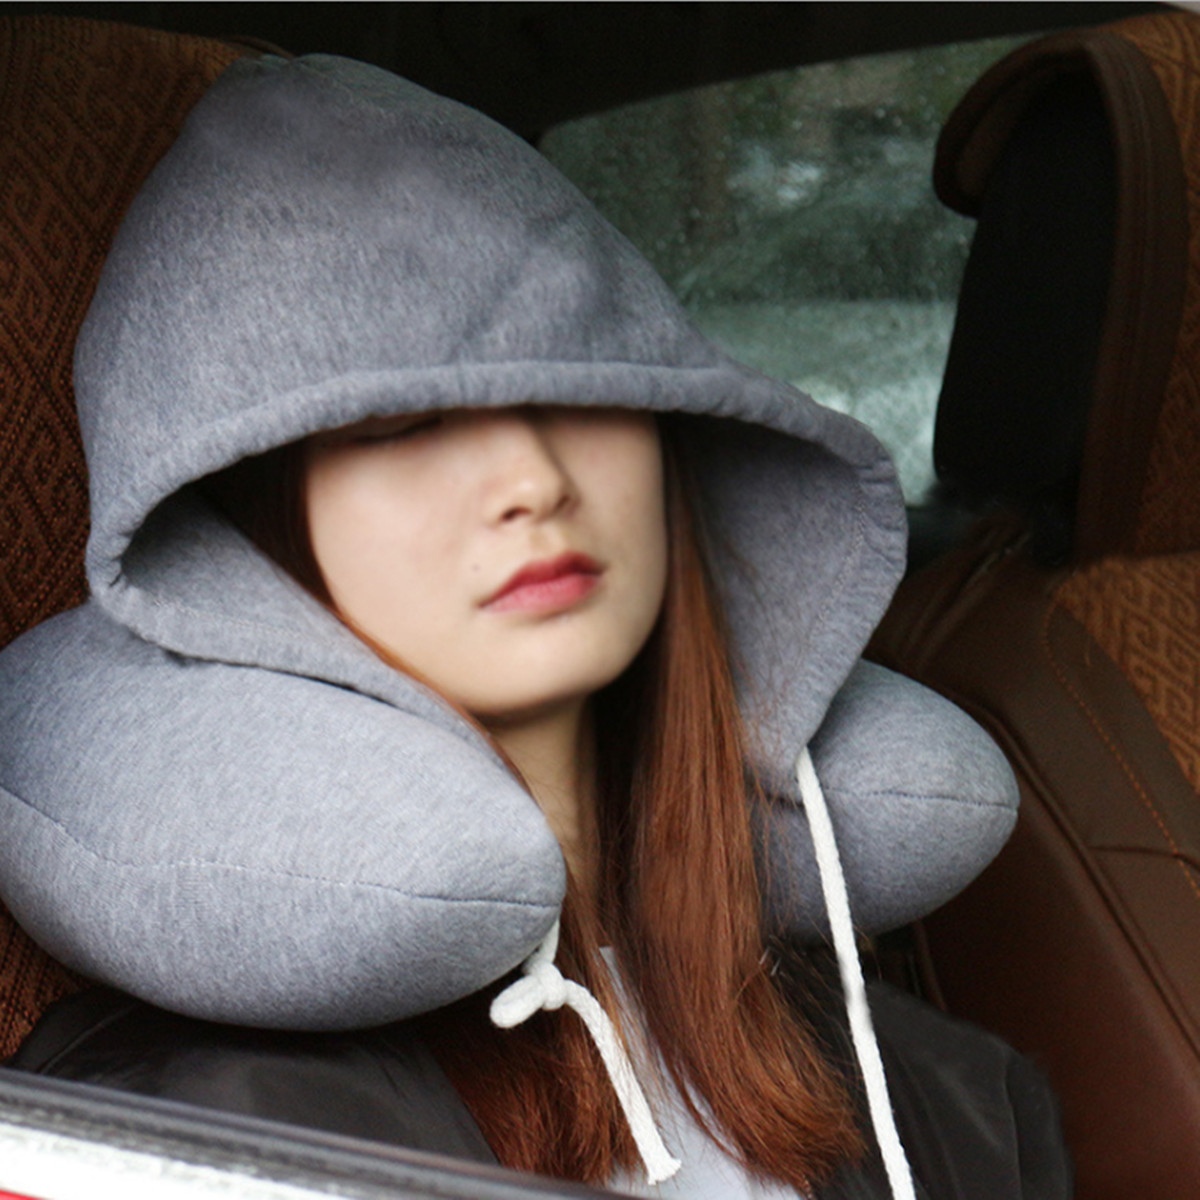 U-Shaped-Hooded-Pillow-Cushion-Winter-Warm-Hat-Rest-Neck-Support-Winter-Warm-1243401-5